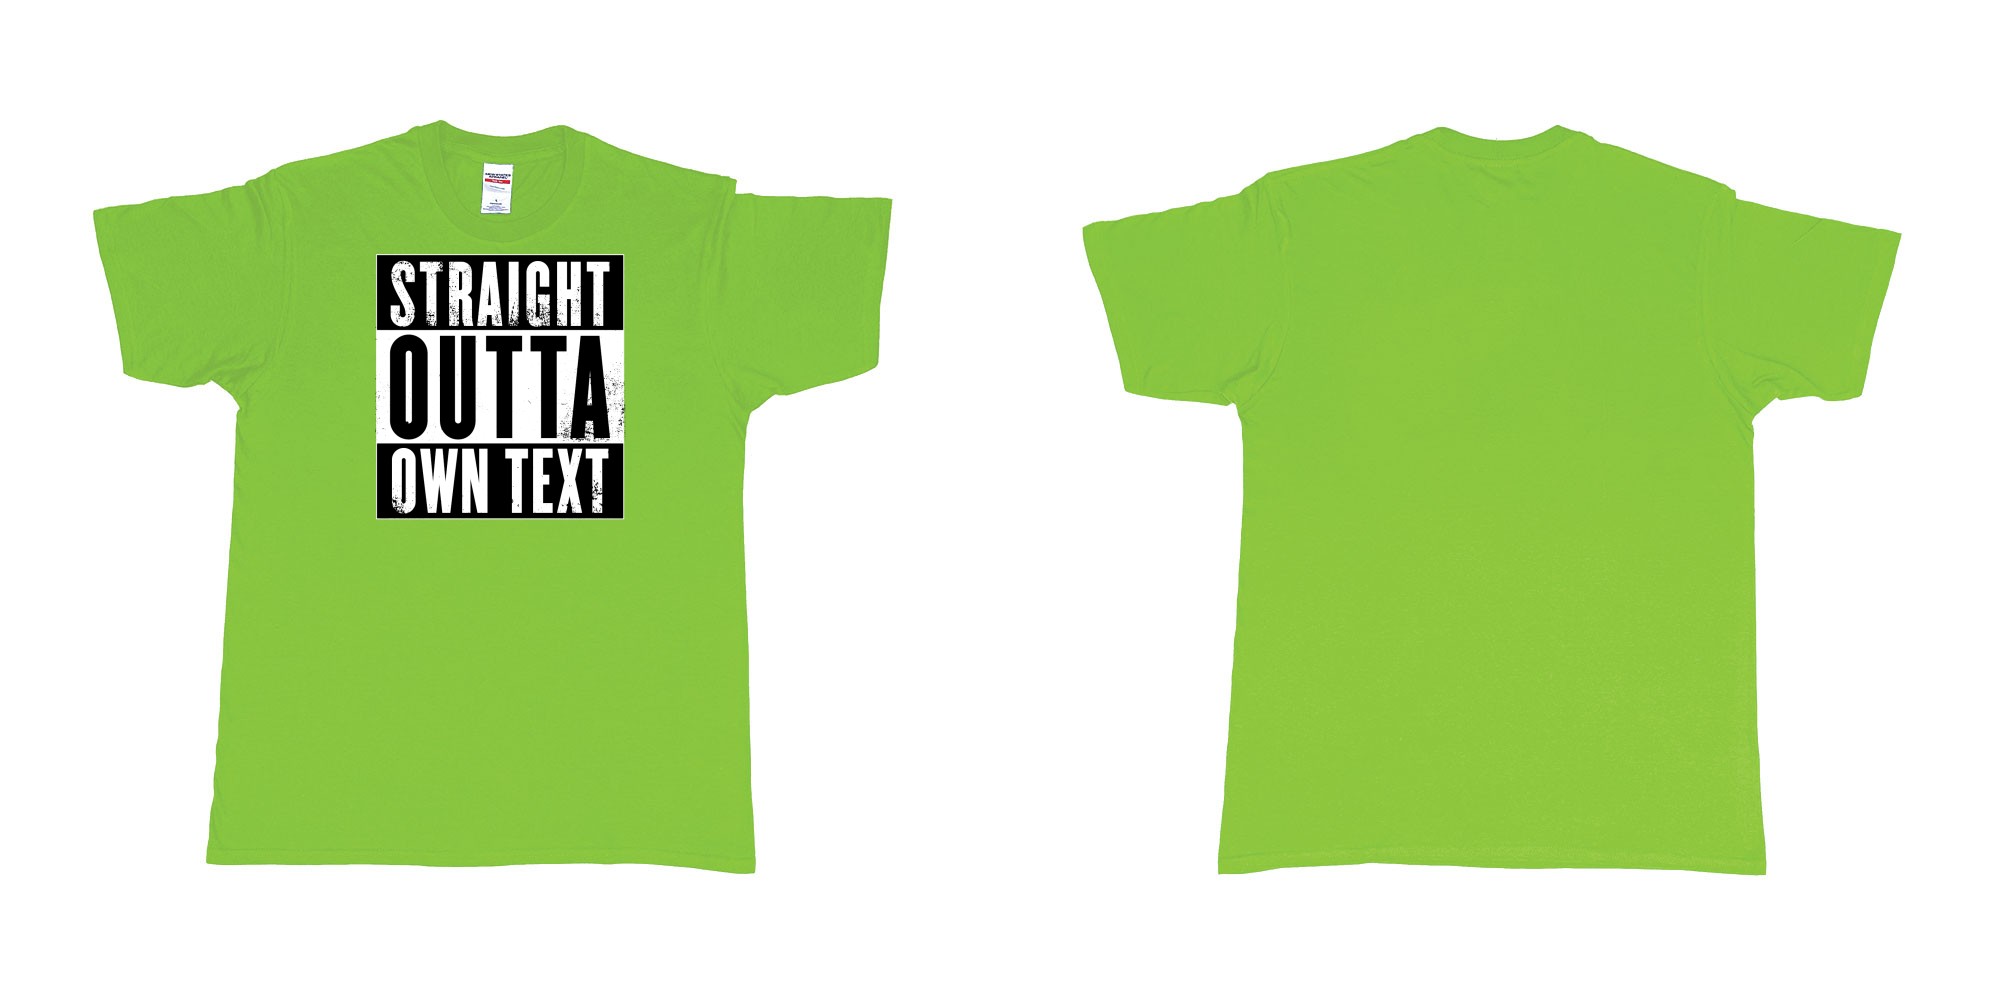 Custom tshirt design Straight Outta Compton in fabric color lime choice your own text made in Bali by The Pirate Way